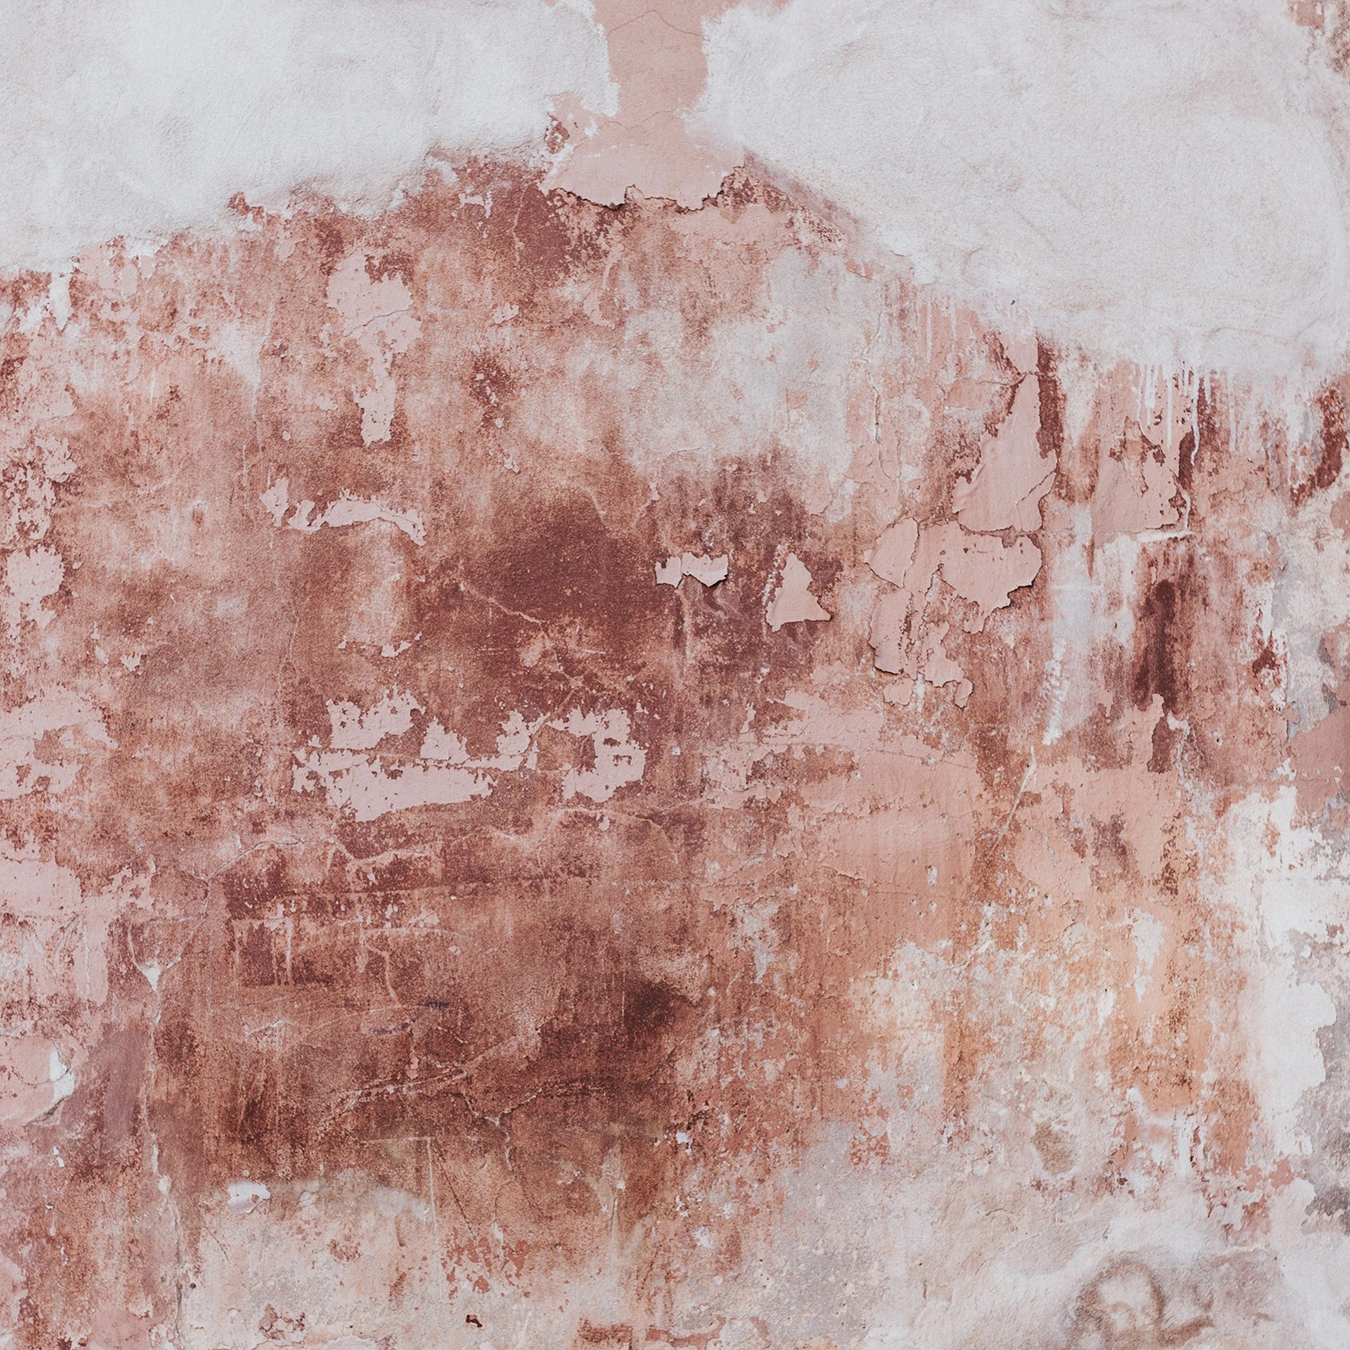 Pink and red Splotchy Wall Stain that Resembles Modern Art